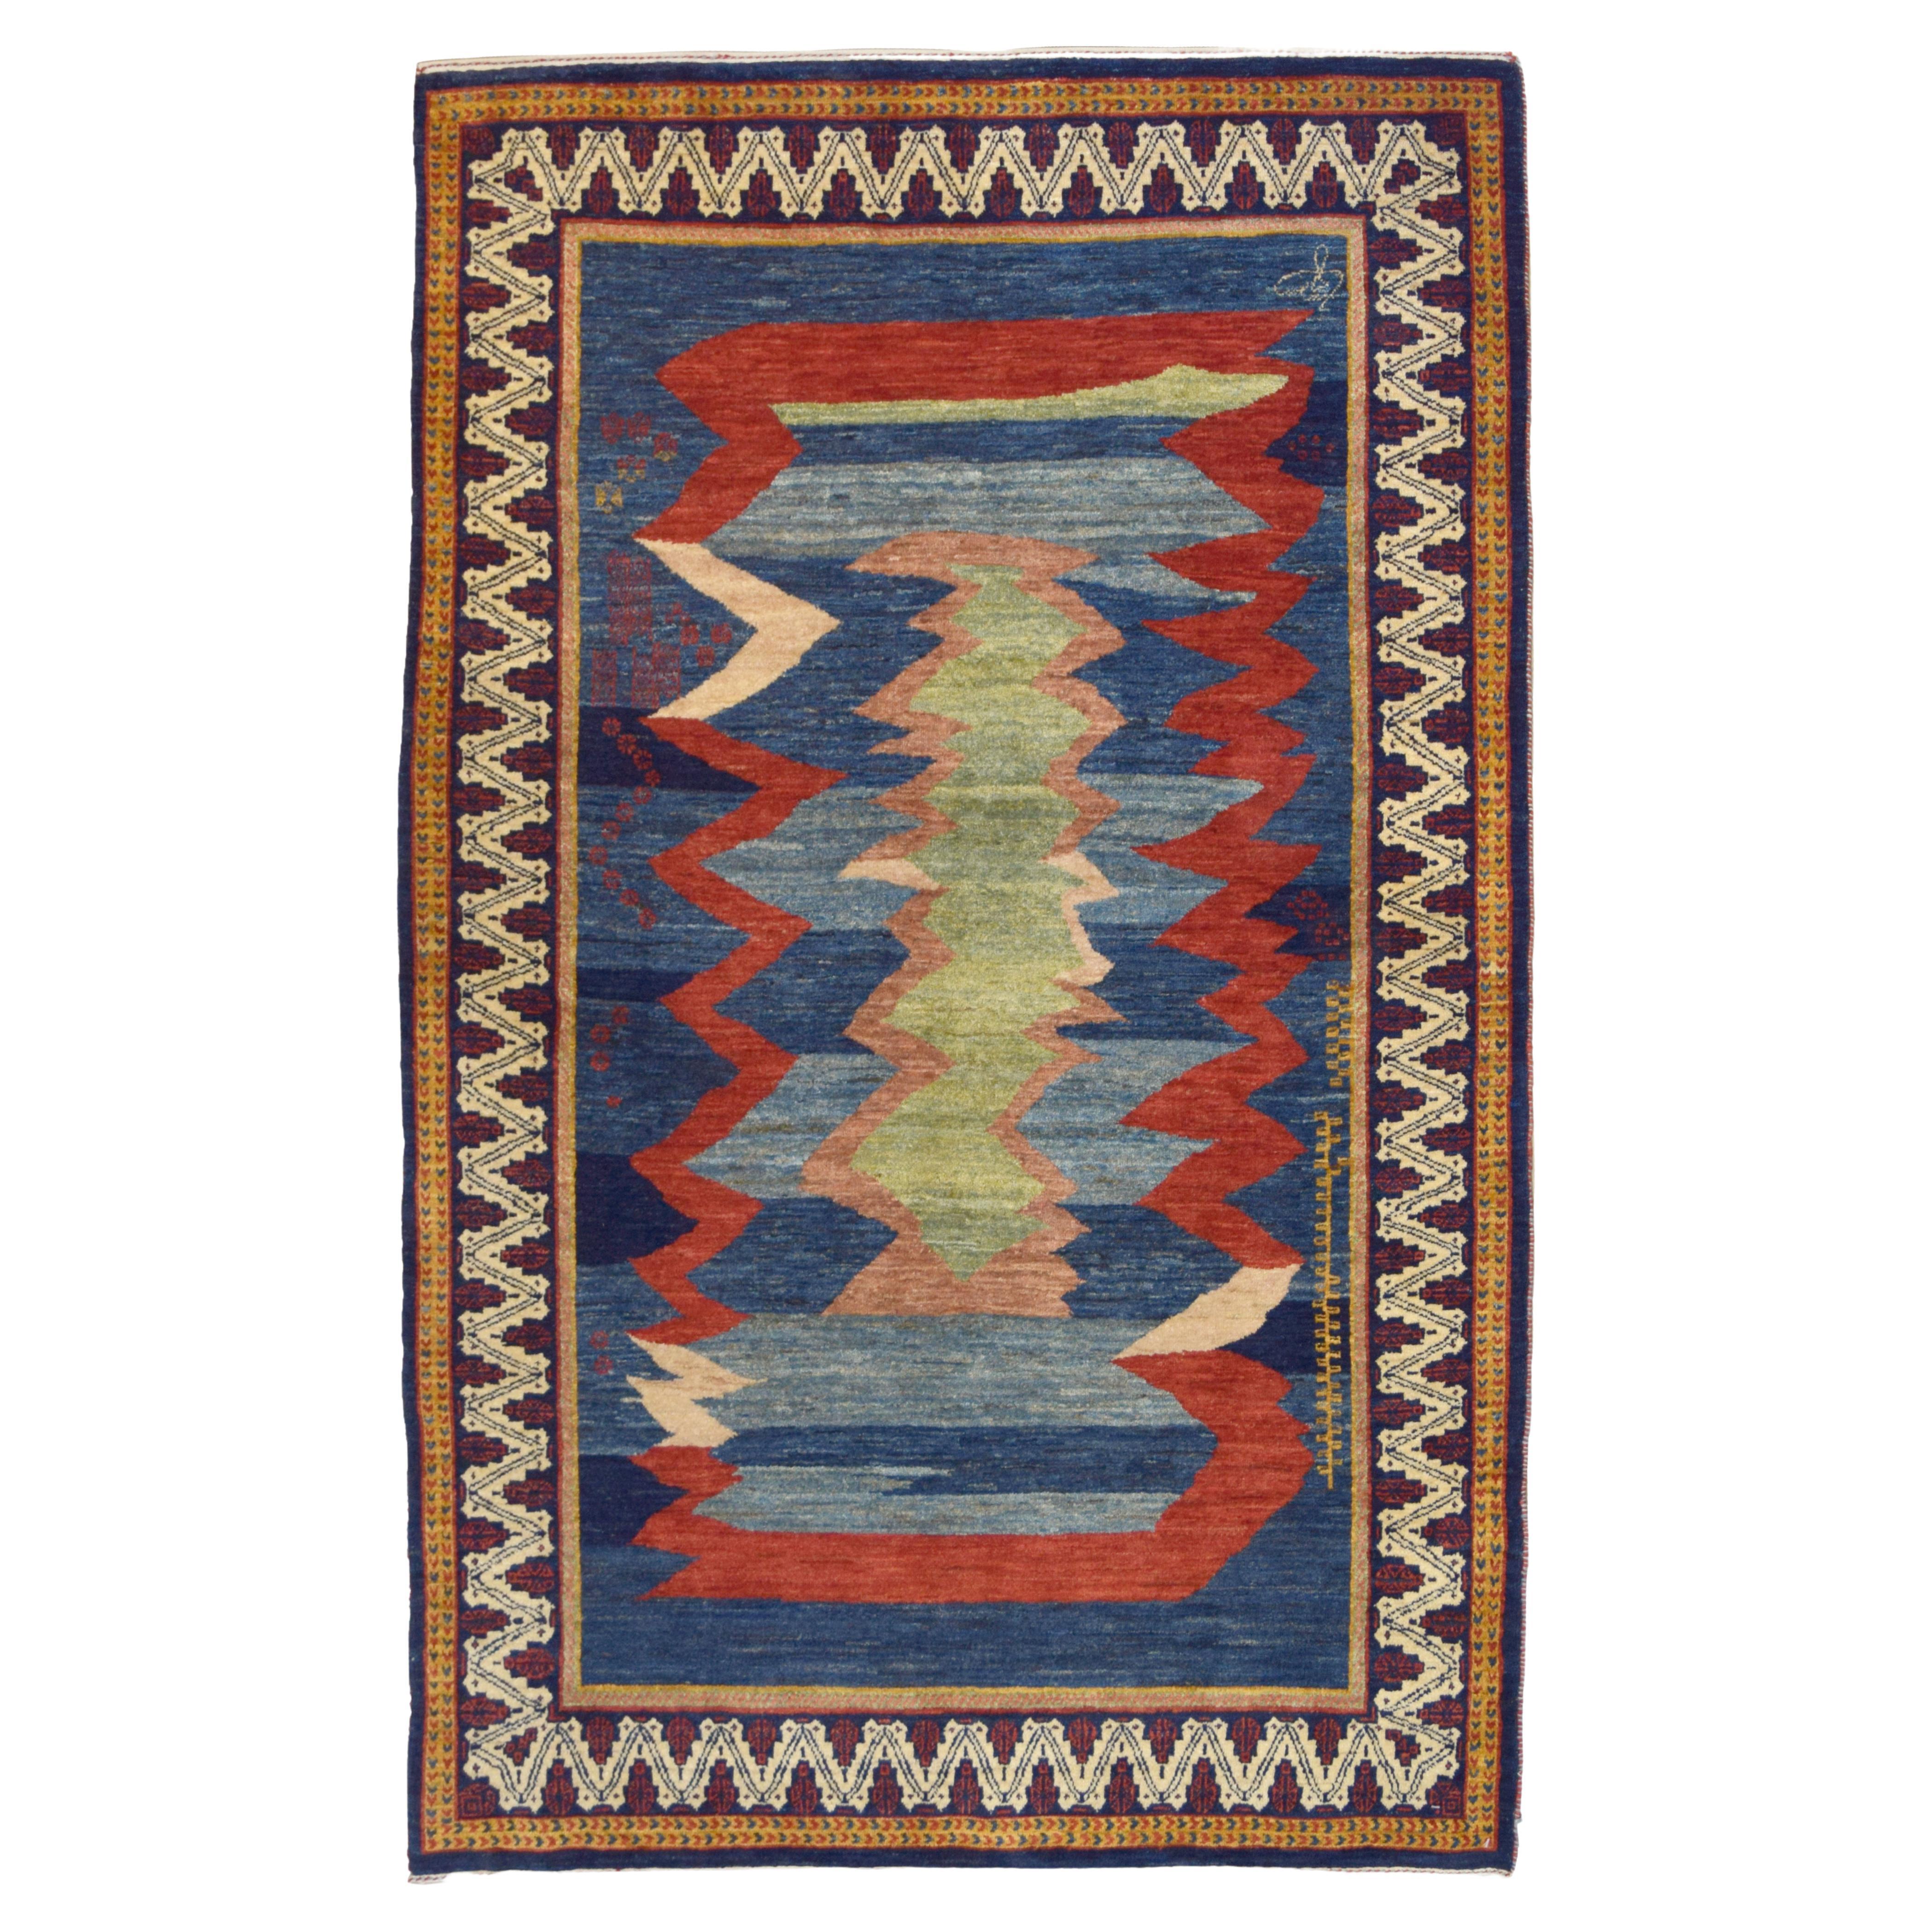 Wool Persian Qashqai Rug, Tribal and Transitional, Blue, Red, Green, 4’ x 6’